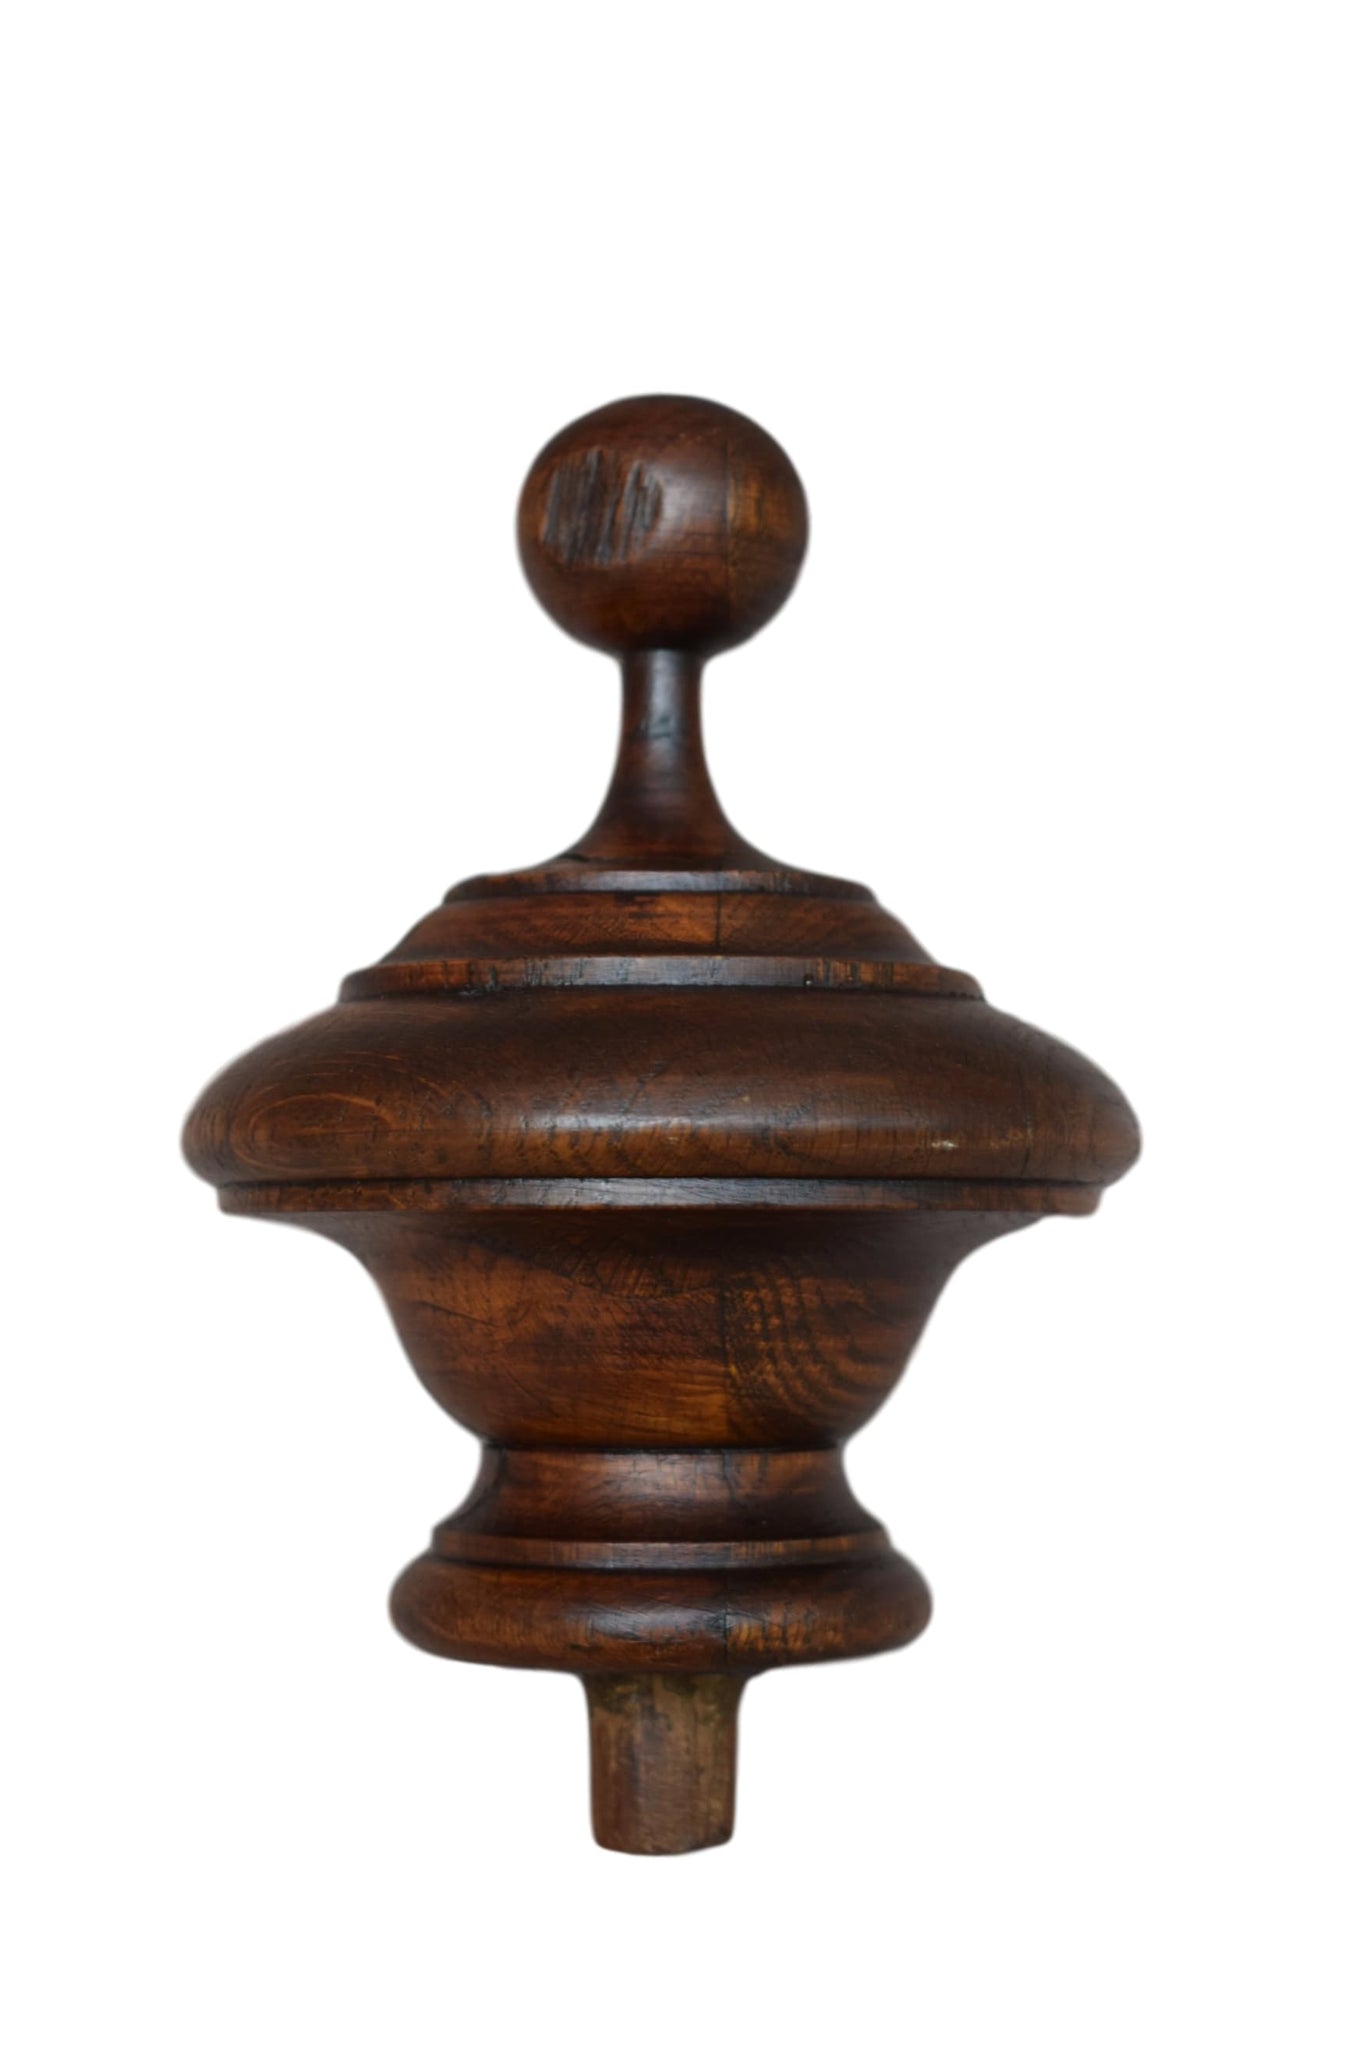 Stairwell Finial - Charmantiques